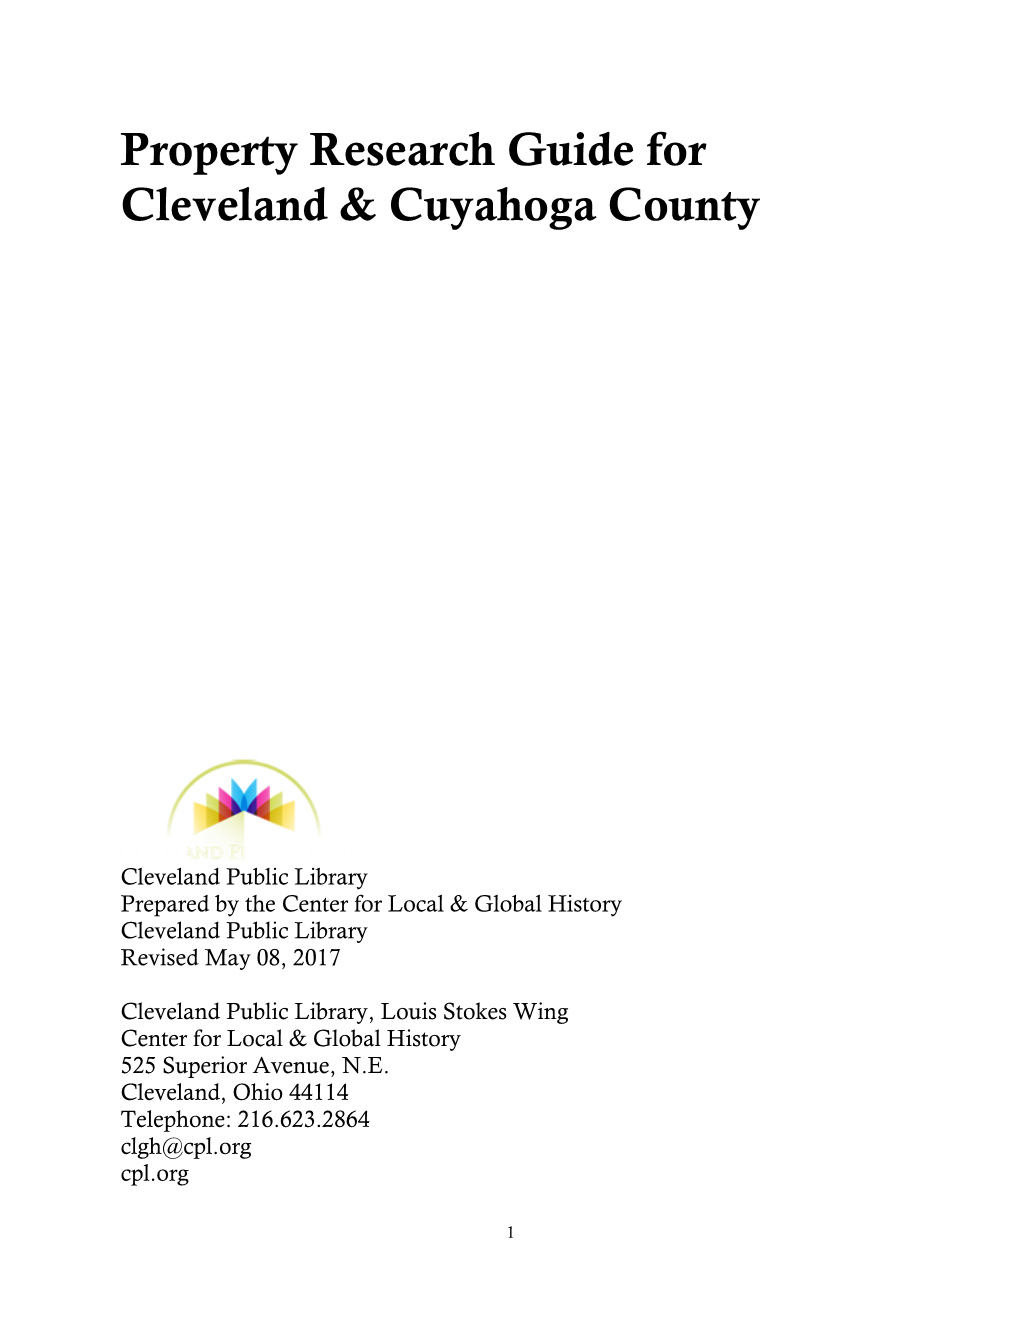 Property Research Guide for Cleveland & Cuyahoga County